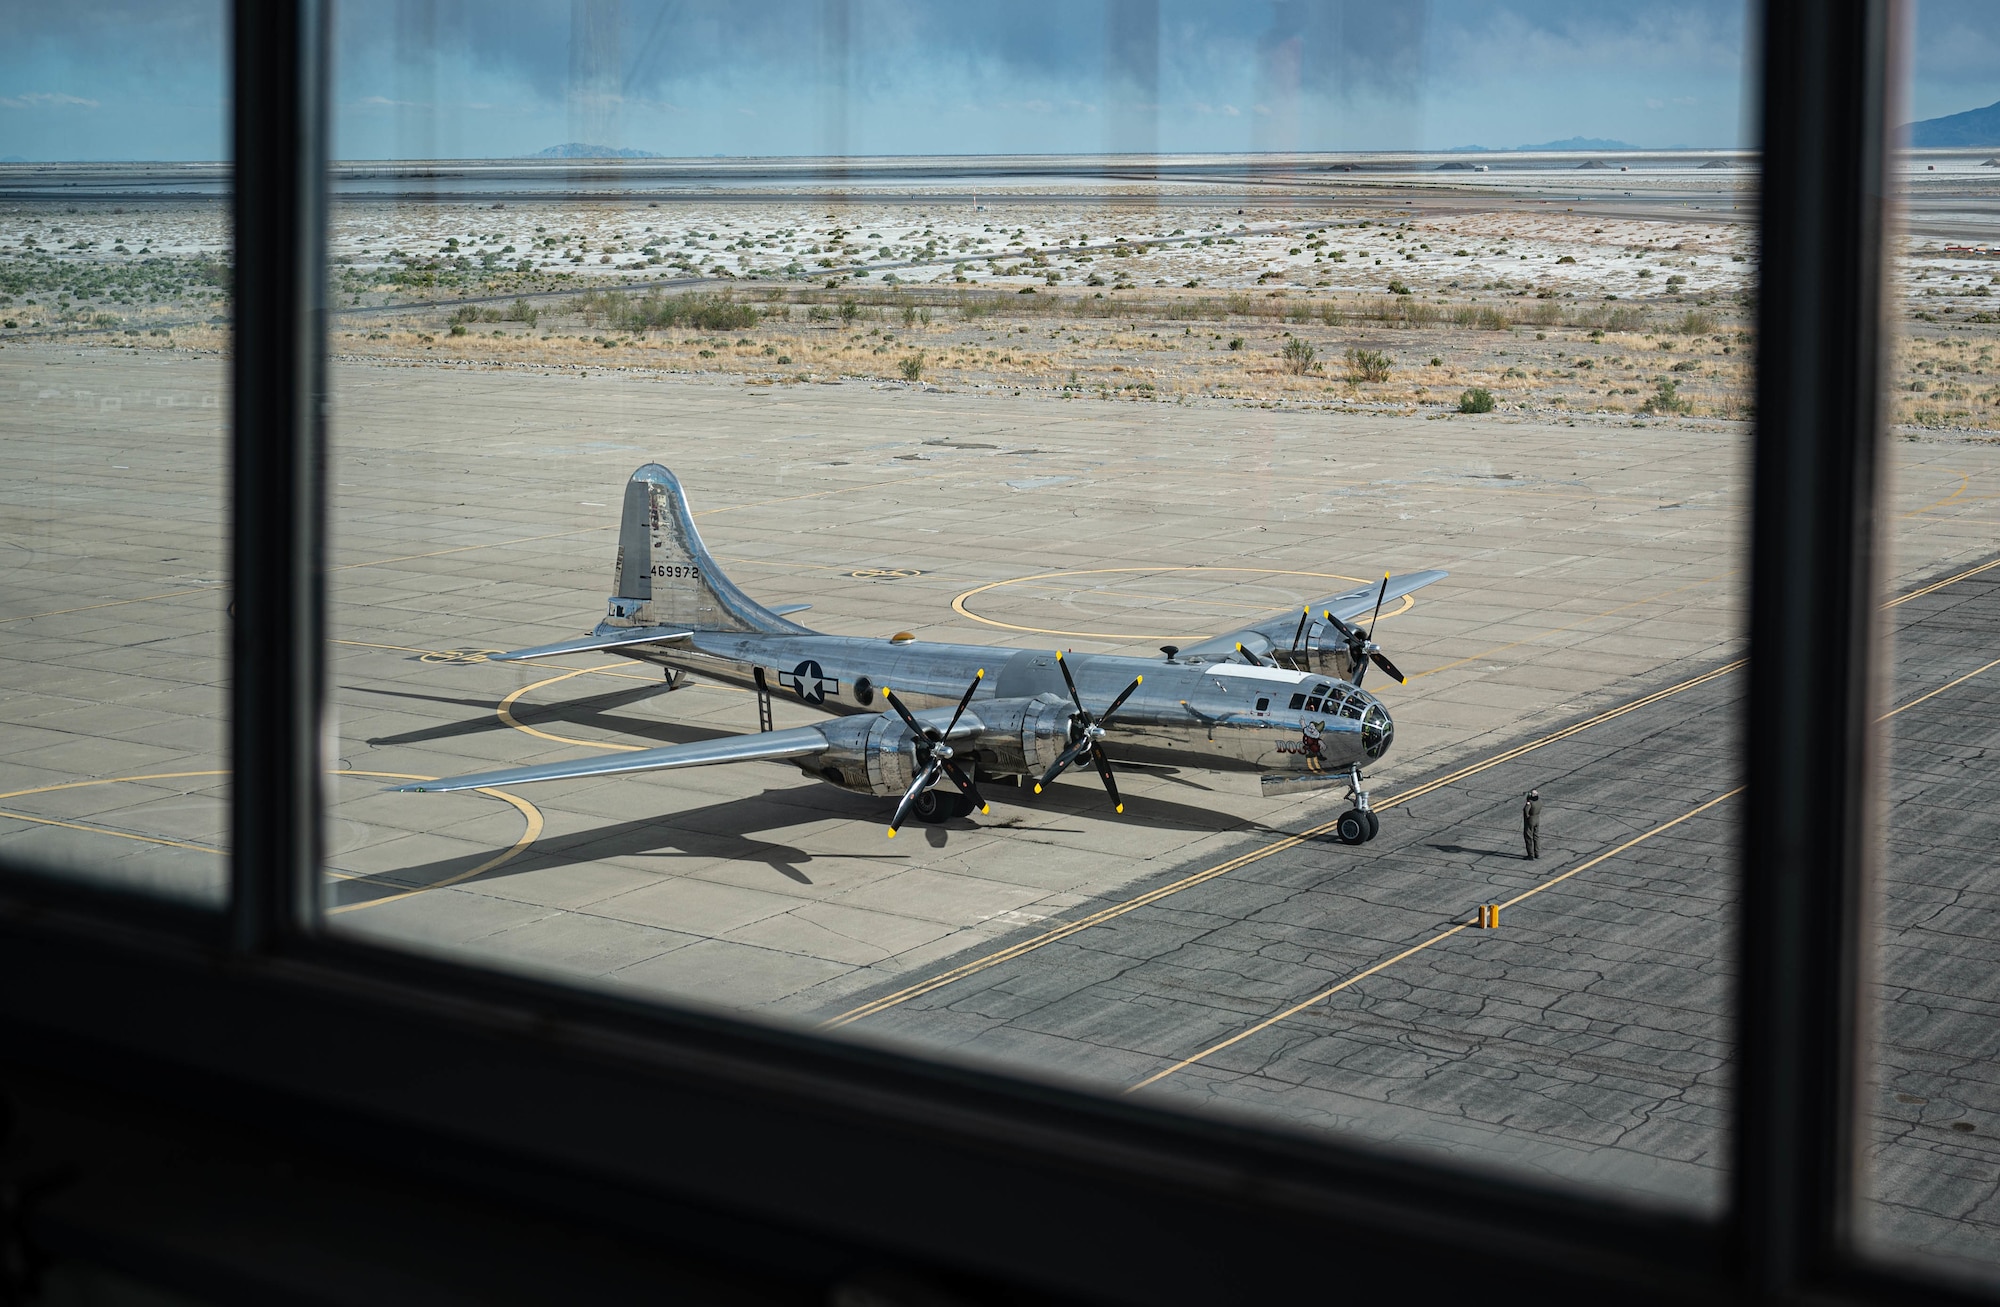 A retired U.S. Army Air Force B-29 Superfortress arrives at Wendover Airfeld, Utah, for a heritage event, May 9, 2022. The B-29 was assigned to the 393rd group under the 509th Composite Group during World War II, stationed at Wendover Air Force Base.